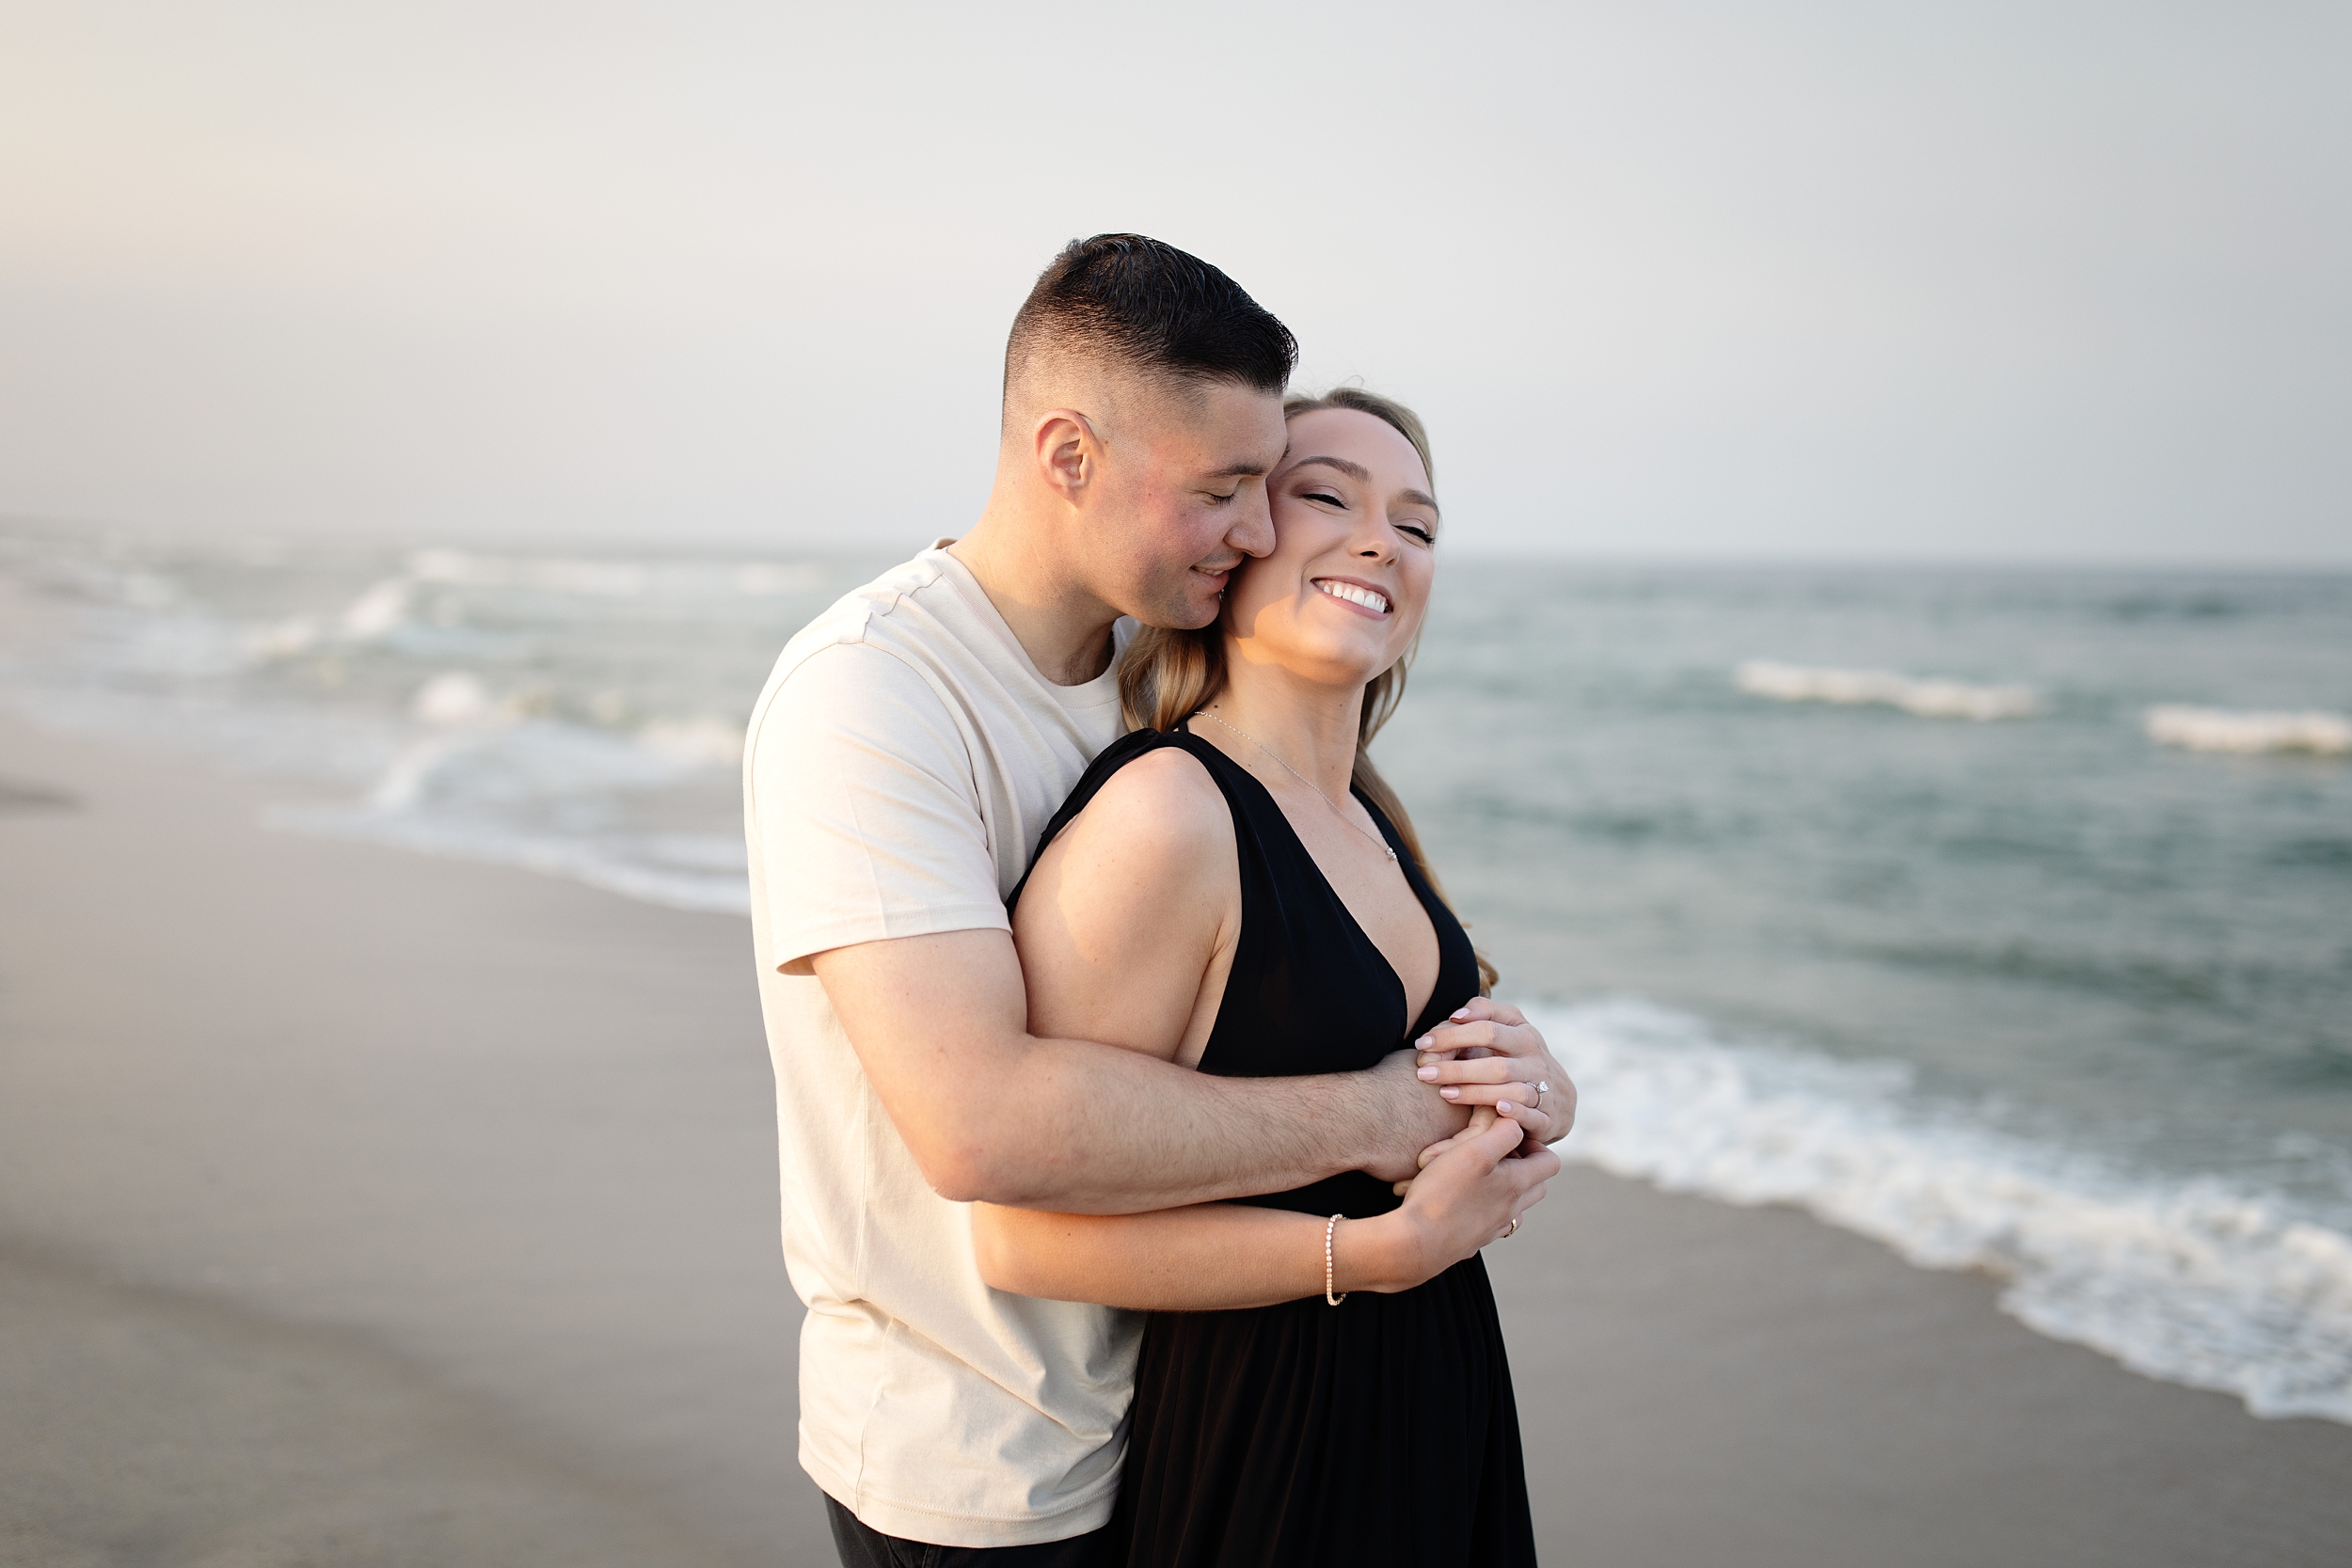 Cape May New Jersey Organic Romantic Spring Engagement Photos at the Beach, Cape May, NJ Wedding and Engagement Photographer